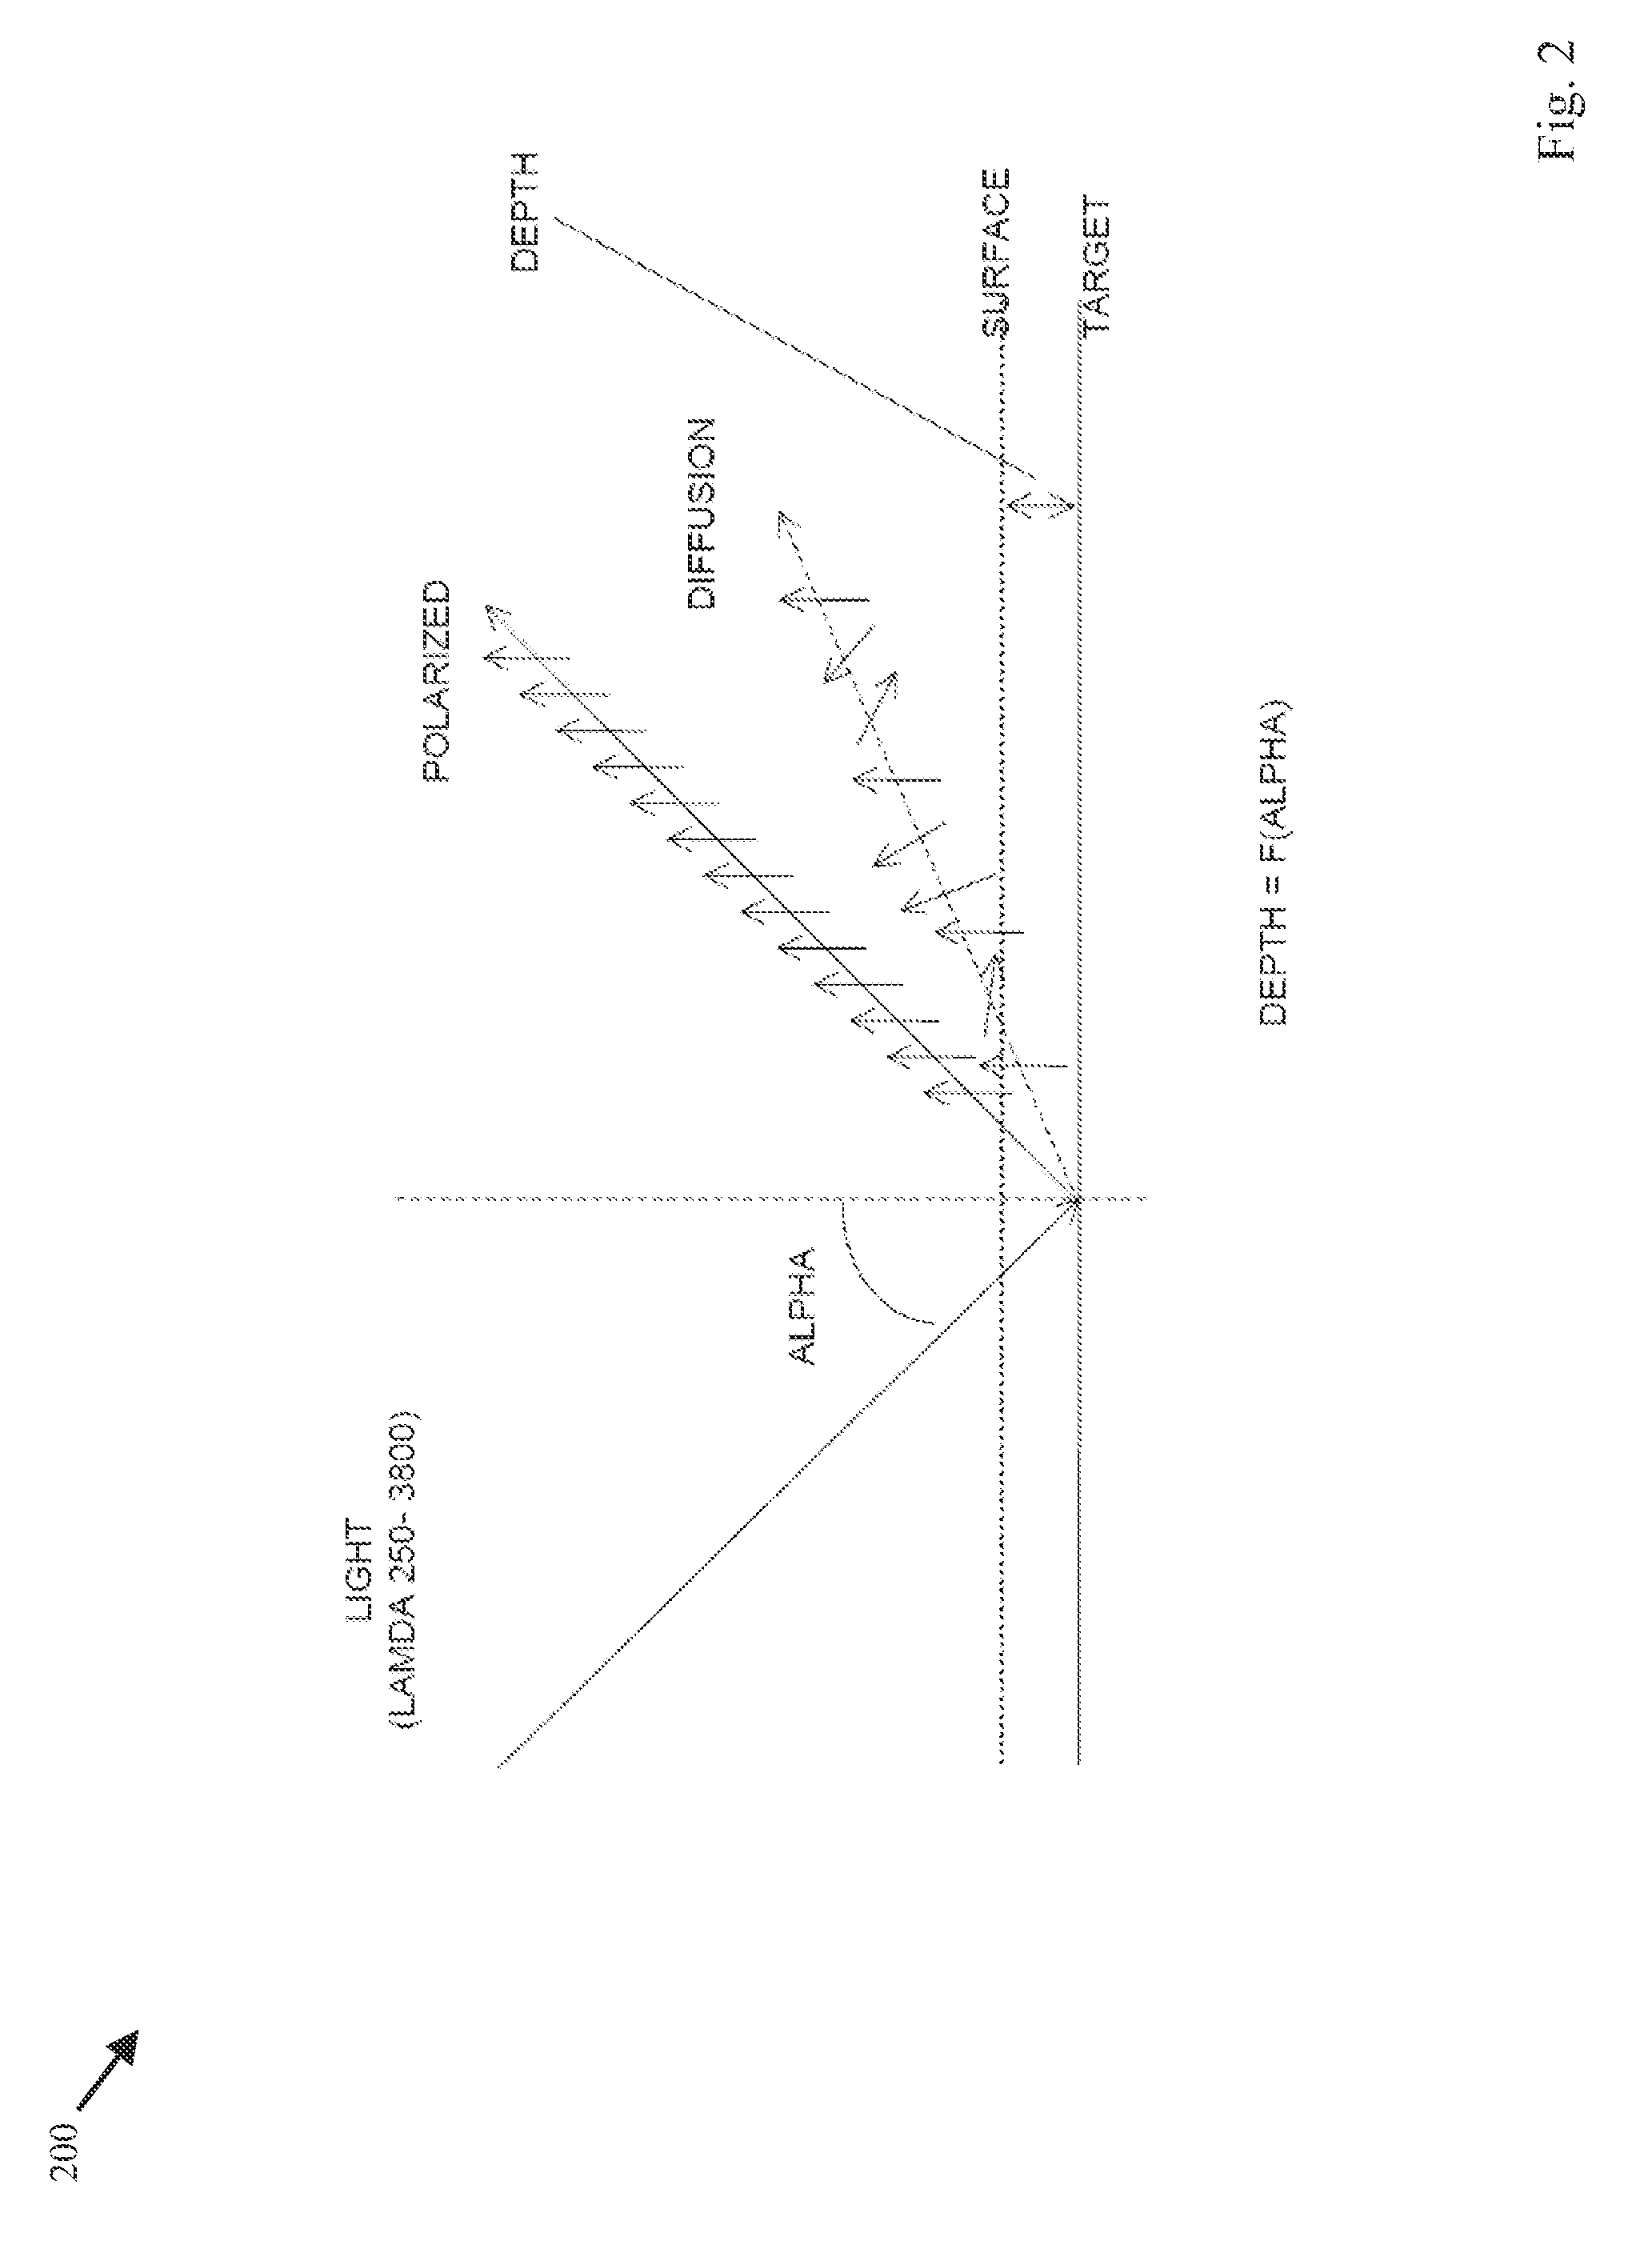 System and method for analysis of light-matter interaction based on spectral convolution